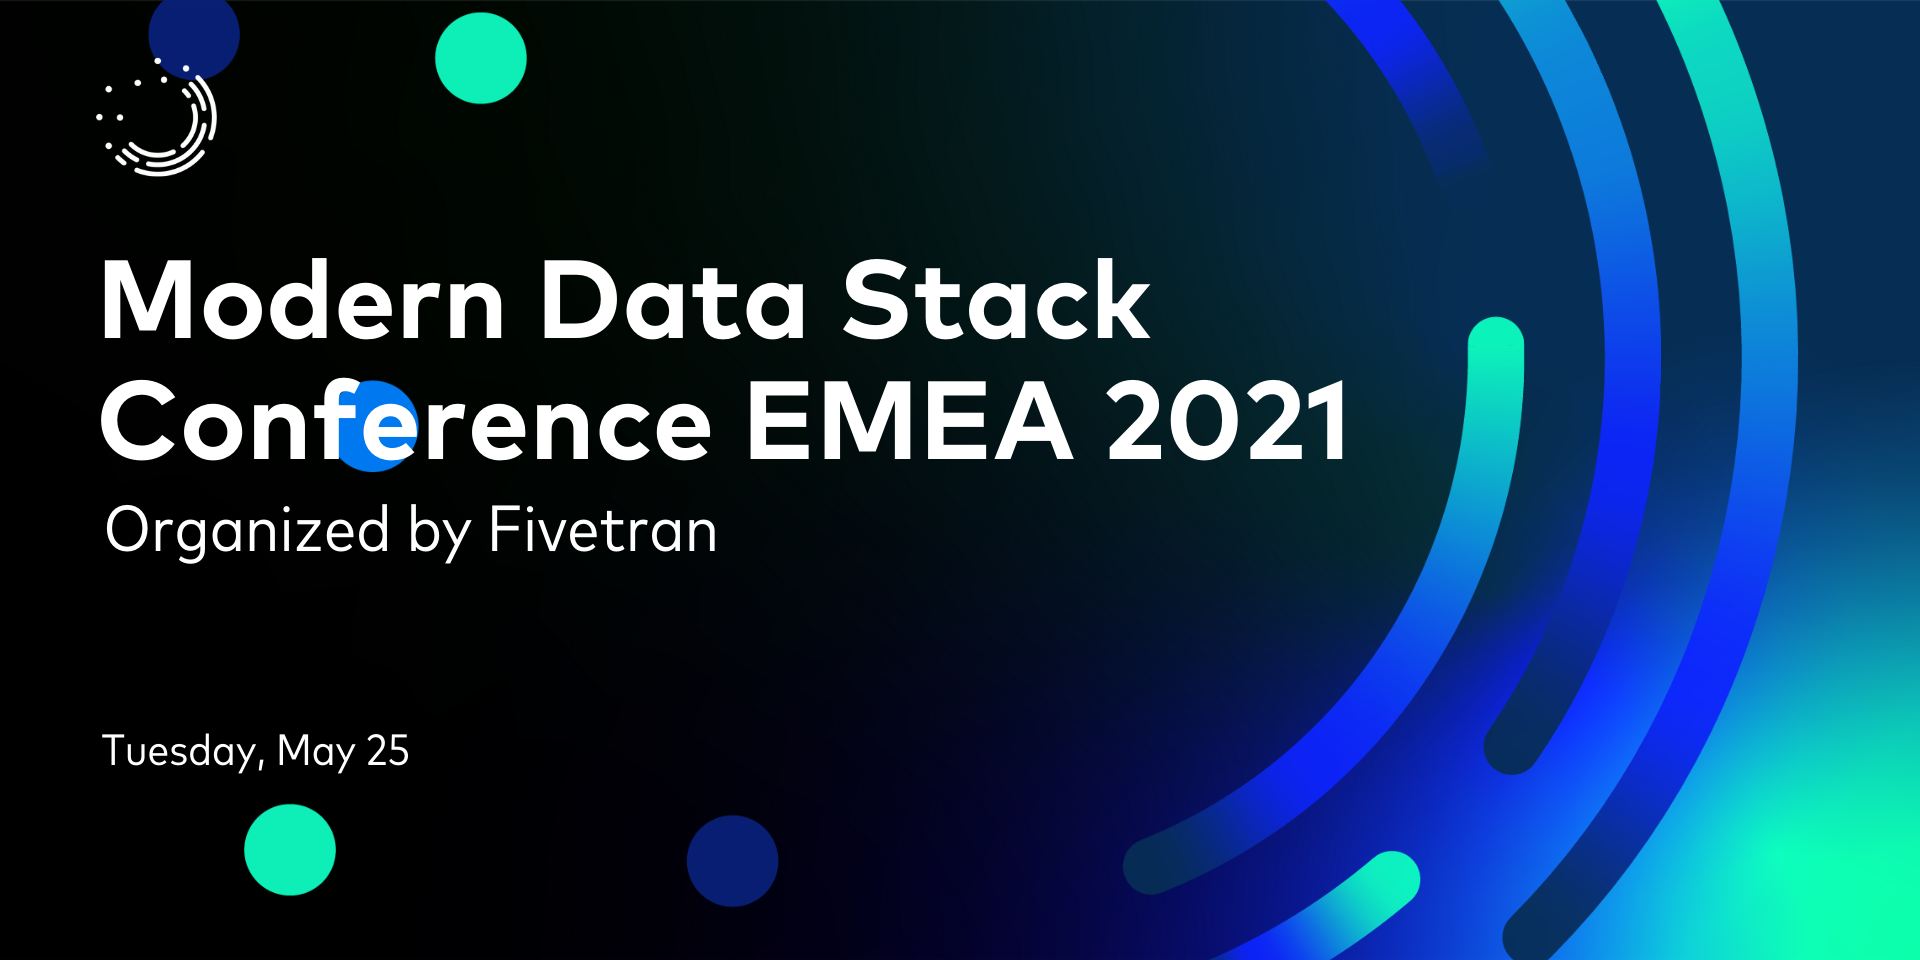 The Modern Data Stack Conference EMEA